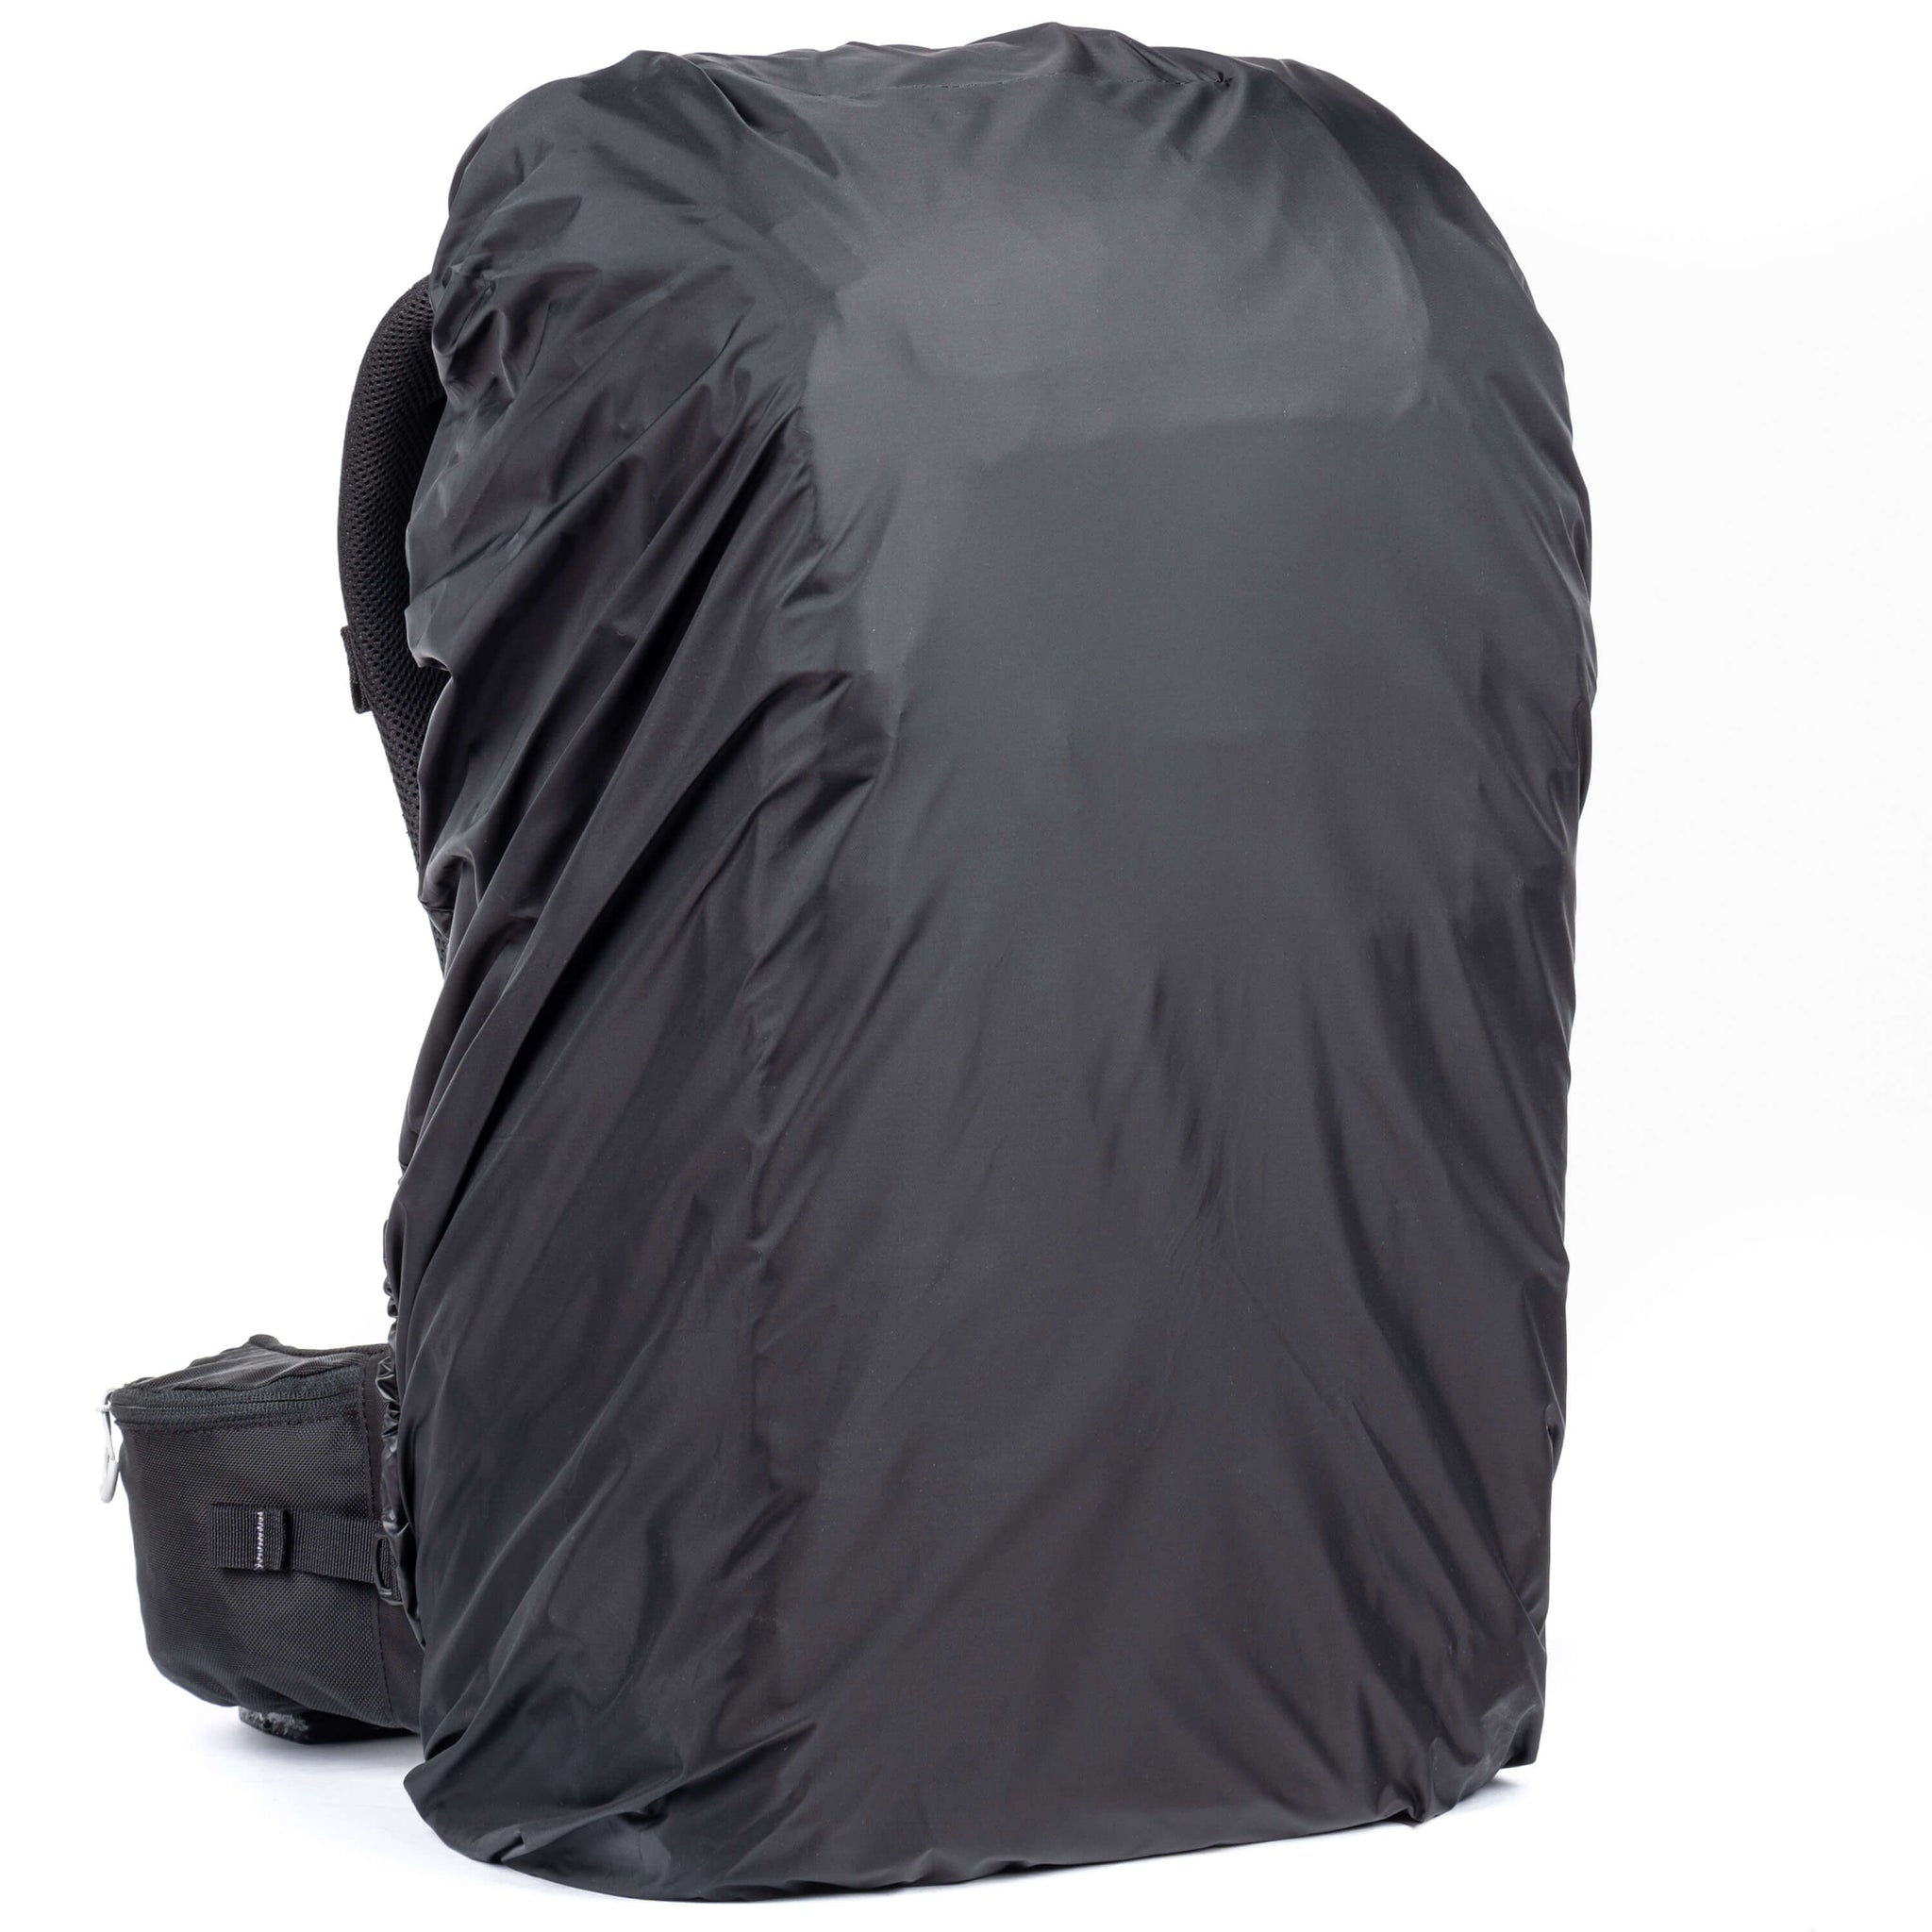 Large rain cover protects small to medium tripods secured to the front of the pack